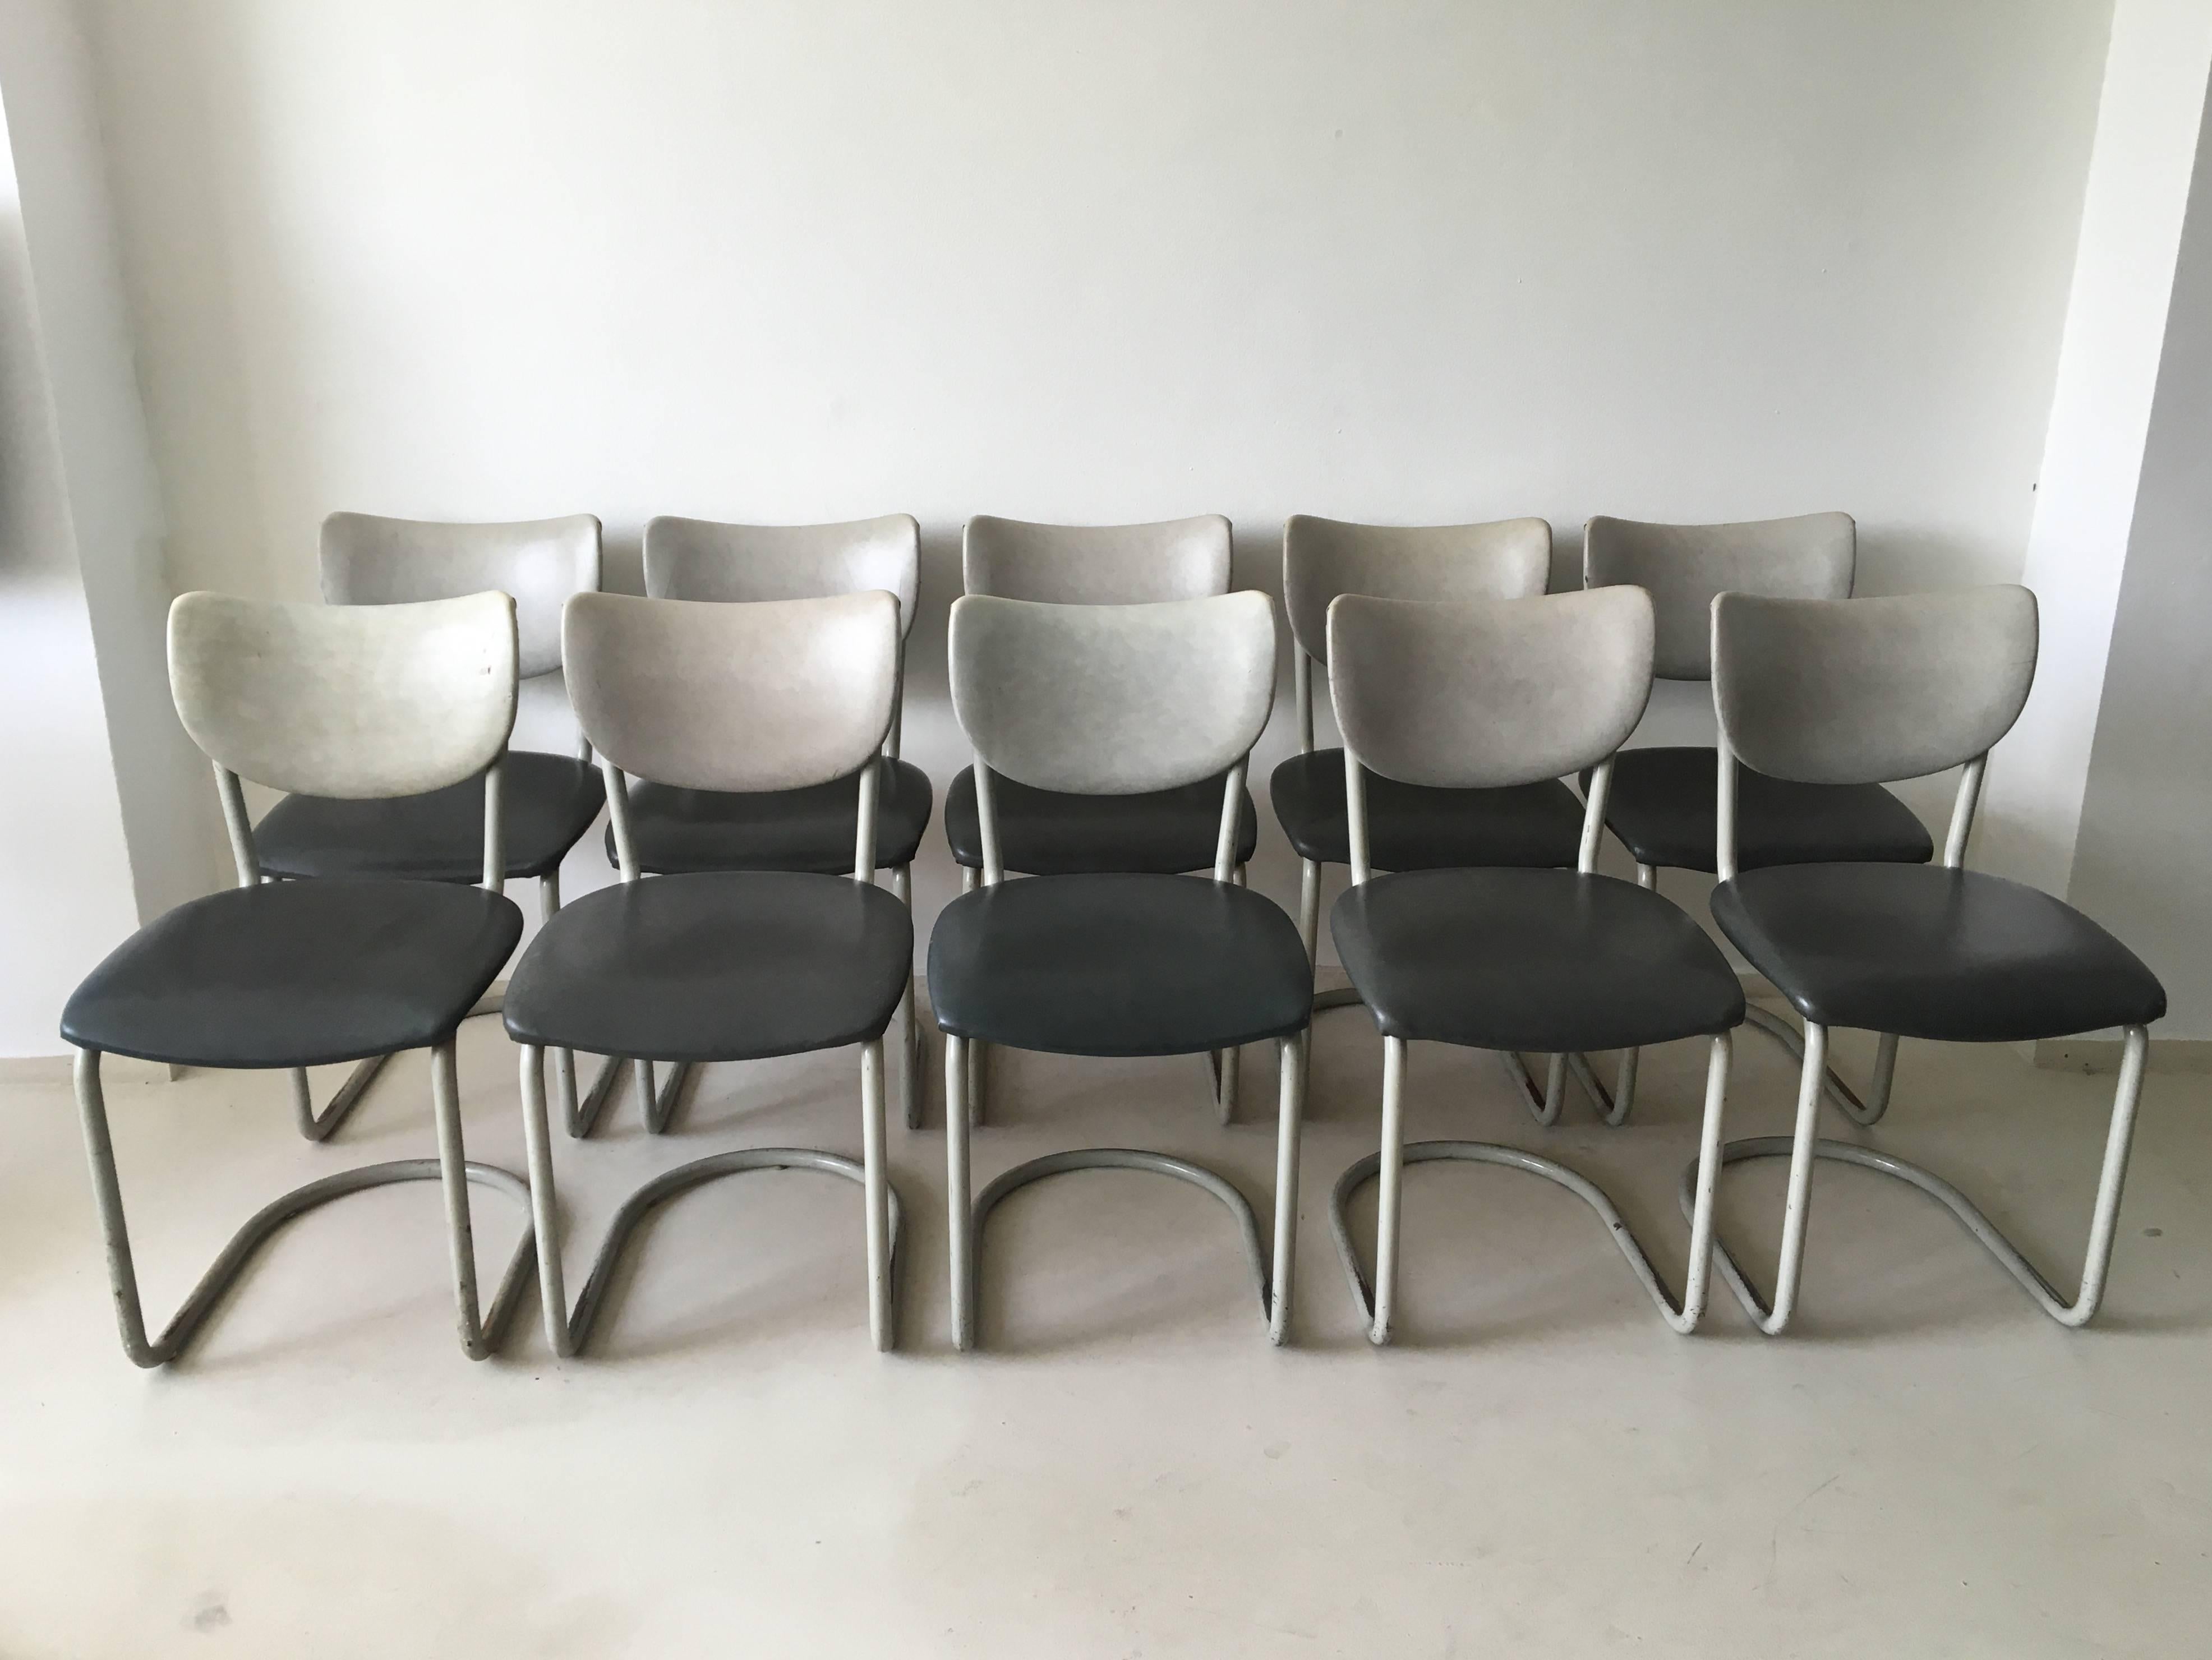 These (dining) chairs were designed by De Wit, Schiedam in the 1950s. The chairs consist of a polished and coated metal frame. Upholstery is in grey and anthracite leatherette. They have an Industrial look and remain in a sturdy, good vintage